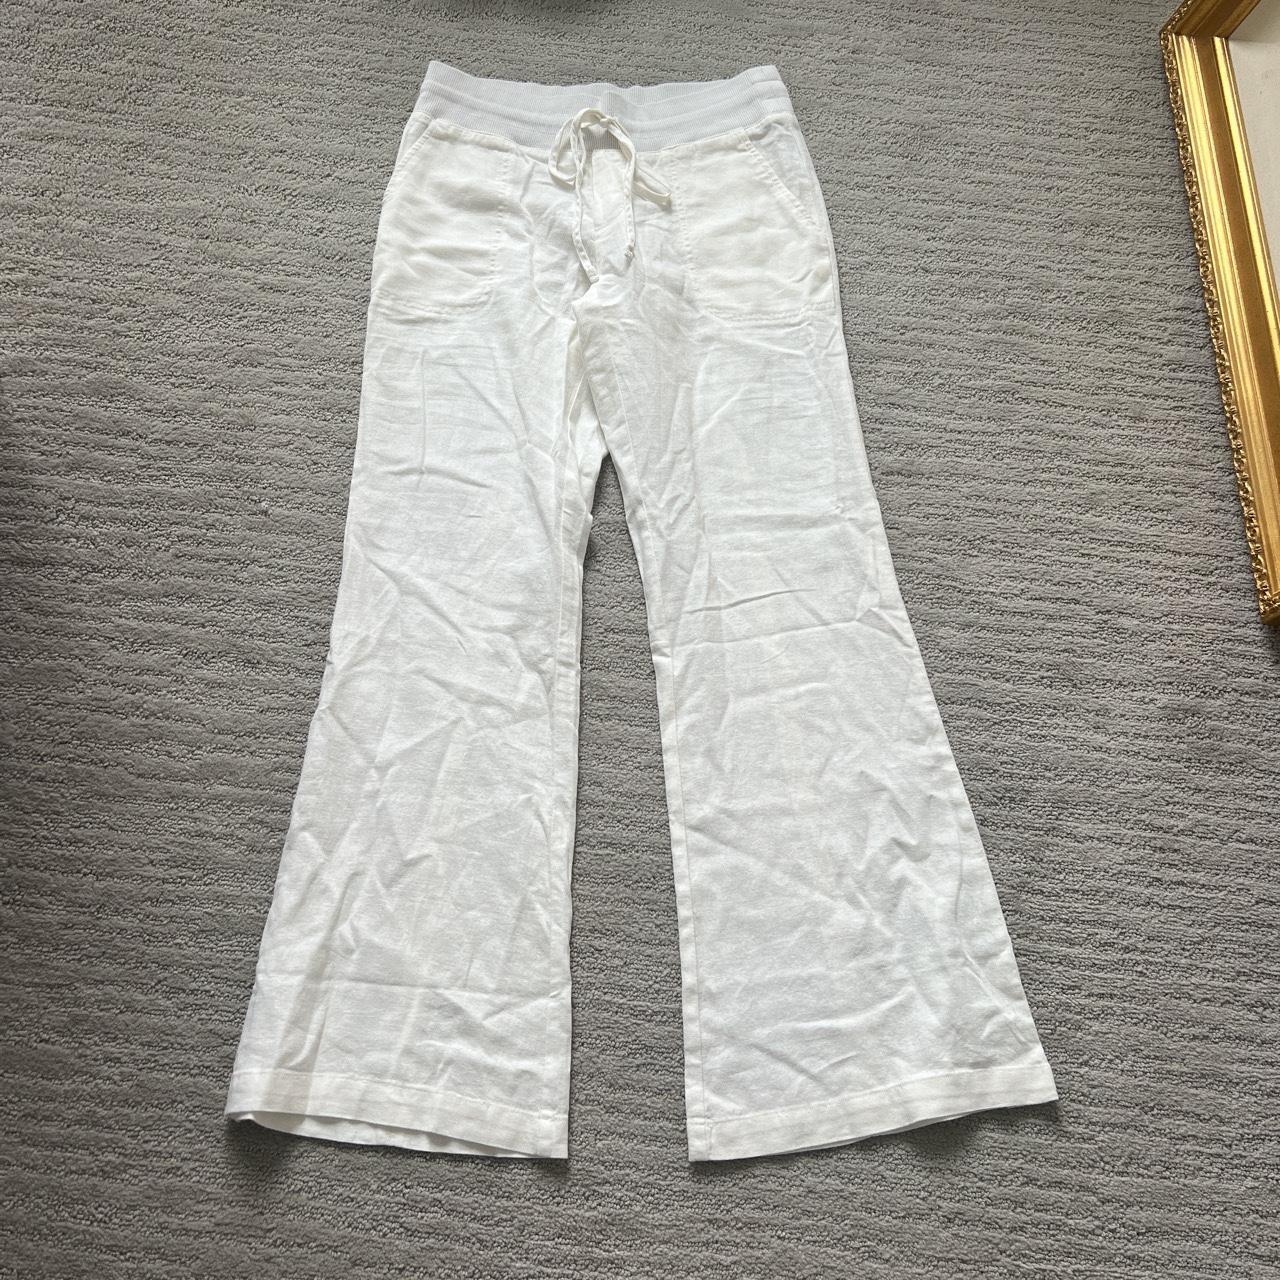 Urban Outfitters Women's Cream Trousers